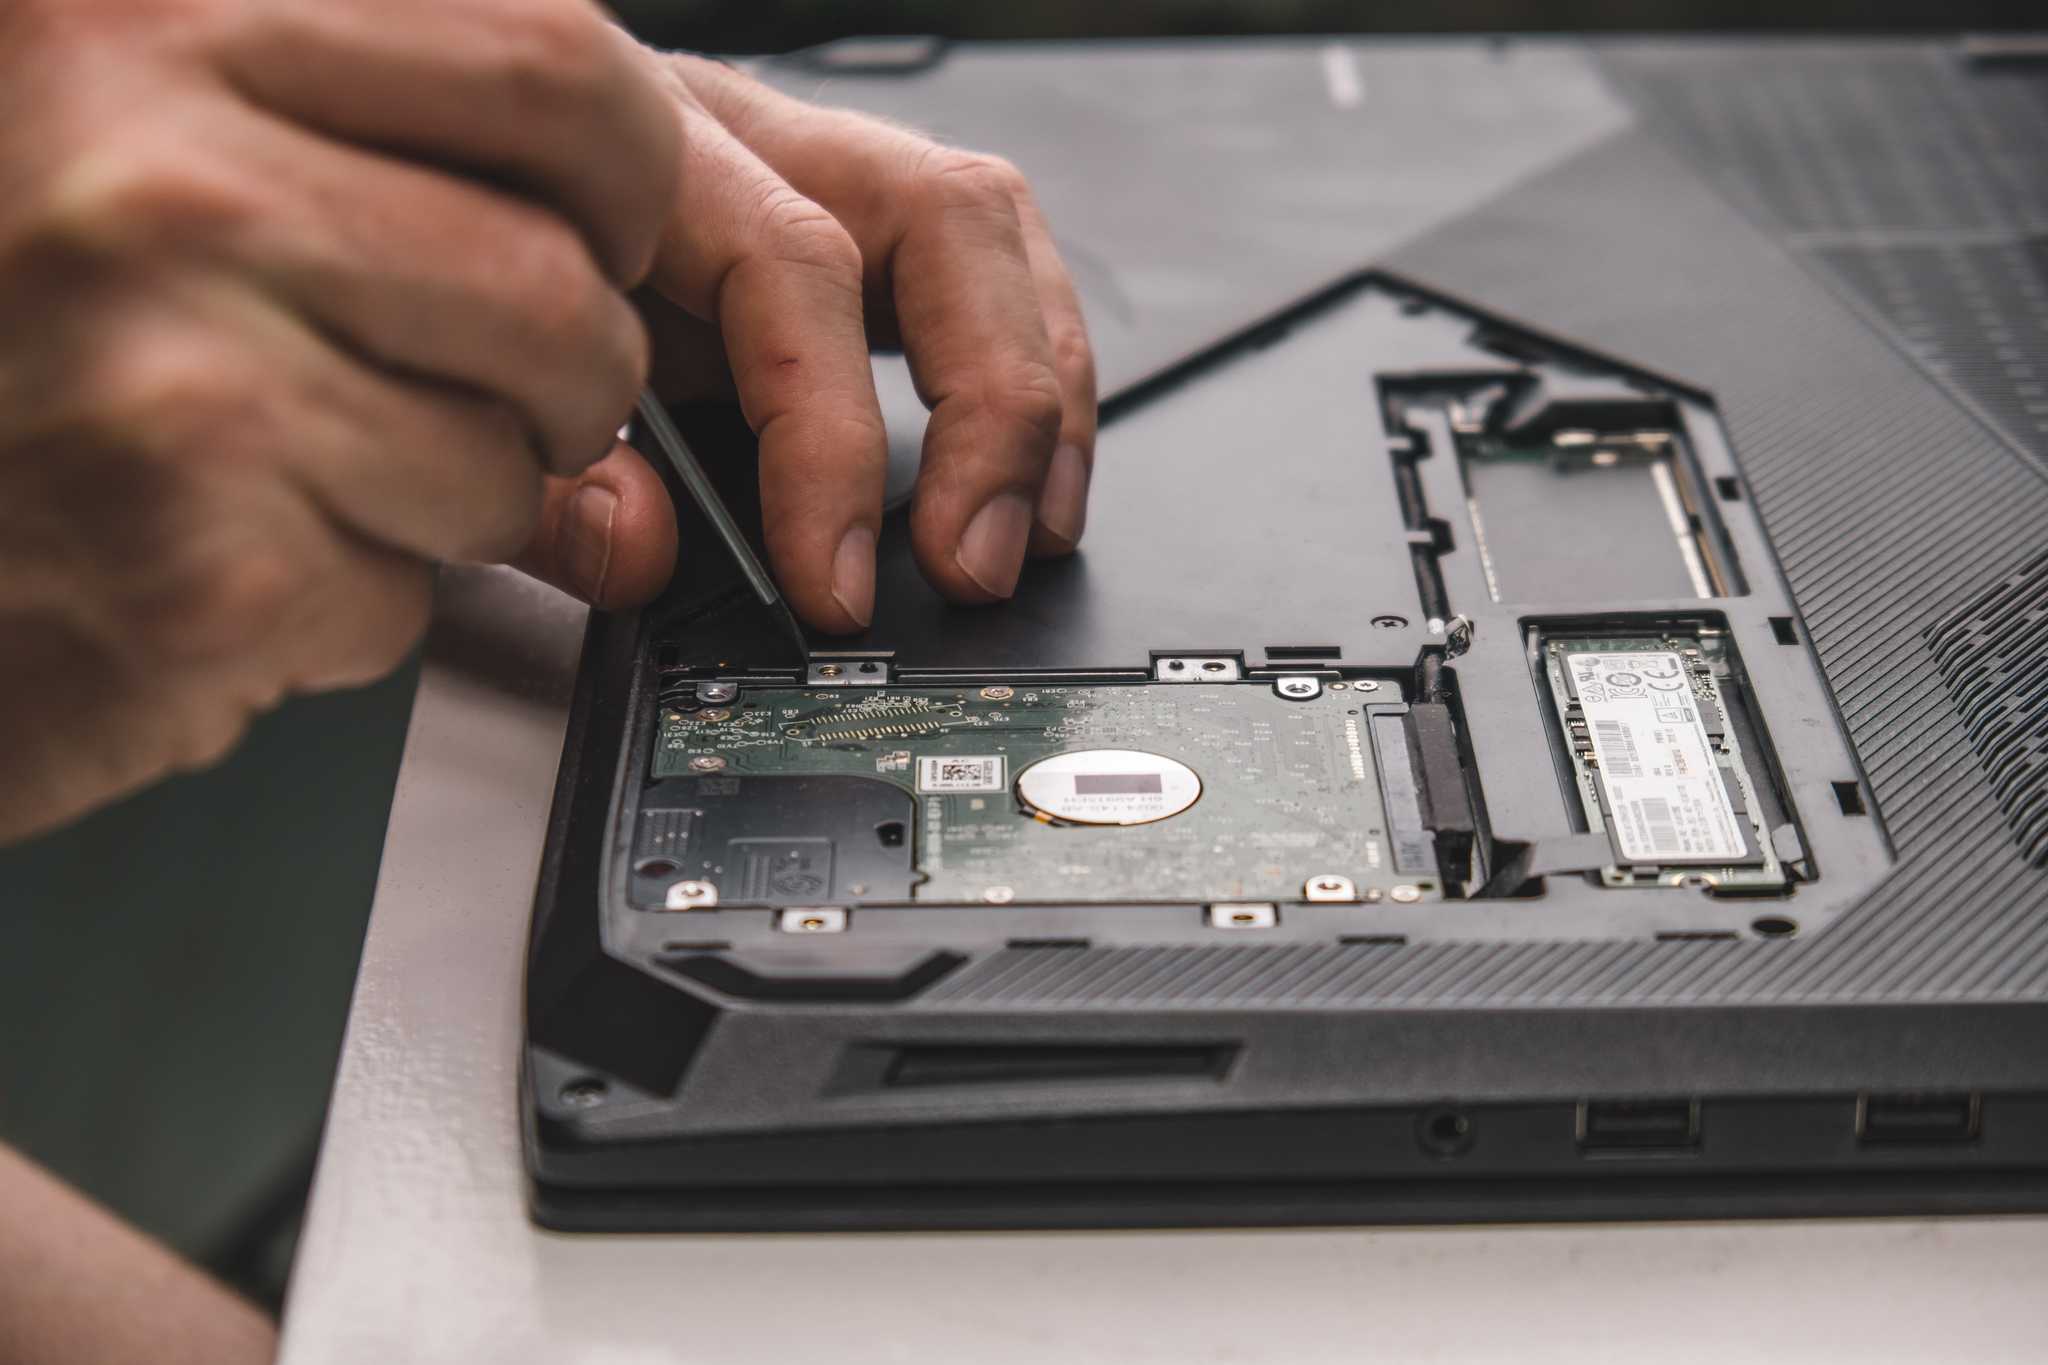 Man removing a hard drive from their laptop.